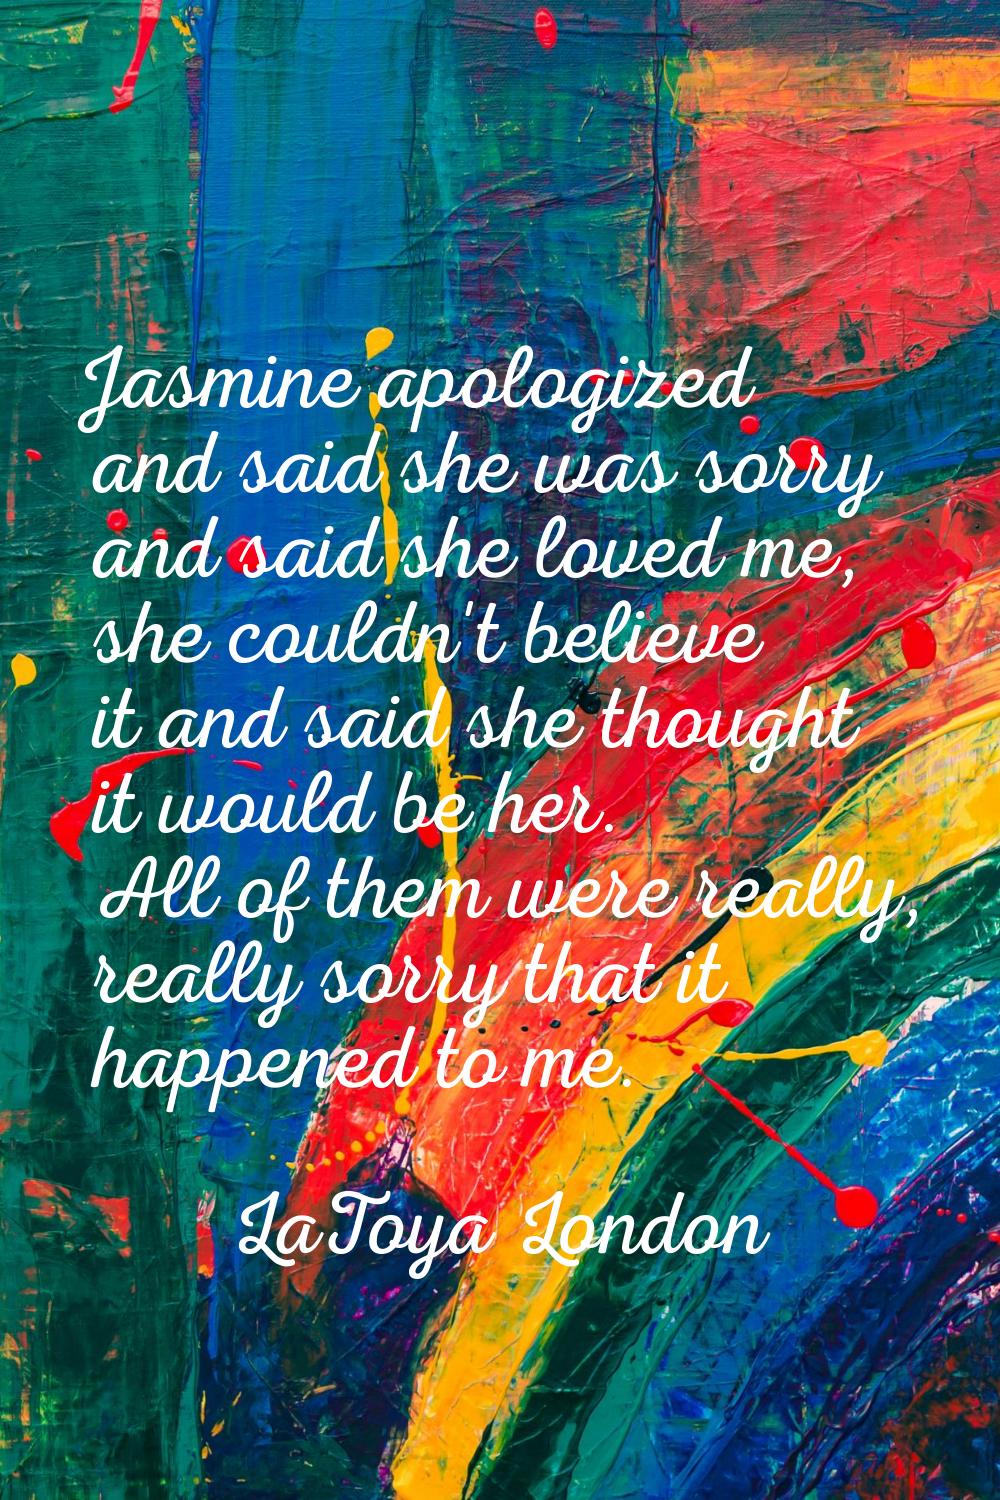 Jasmine apologized and said she was sorry and said she loved me, she couldn't believe it and said s